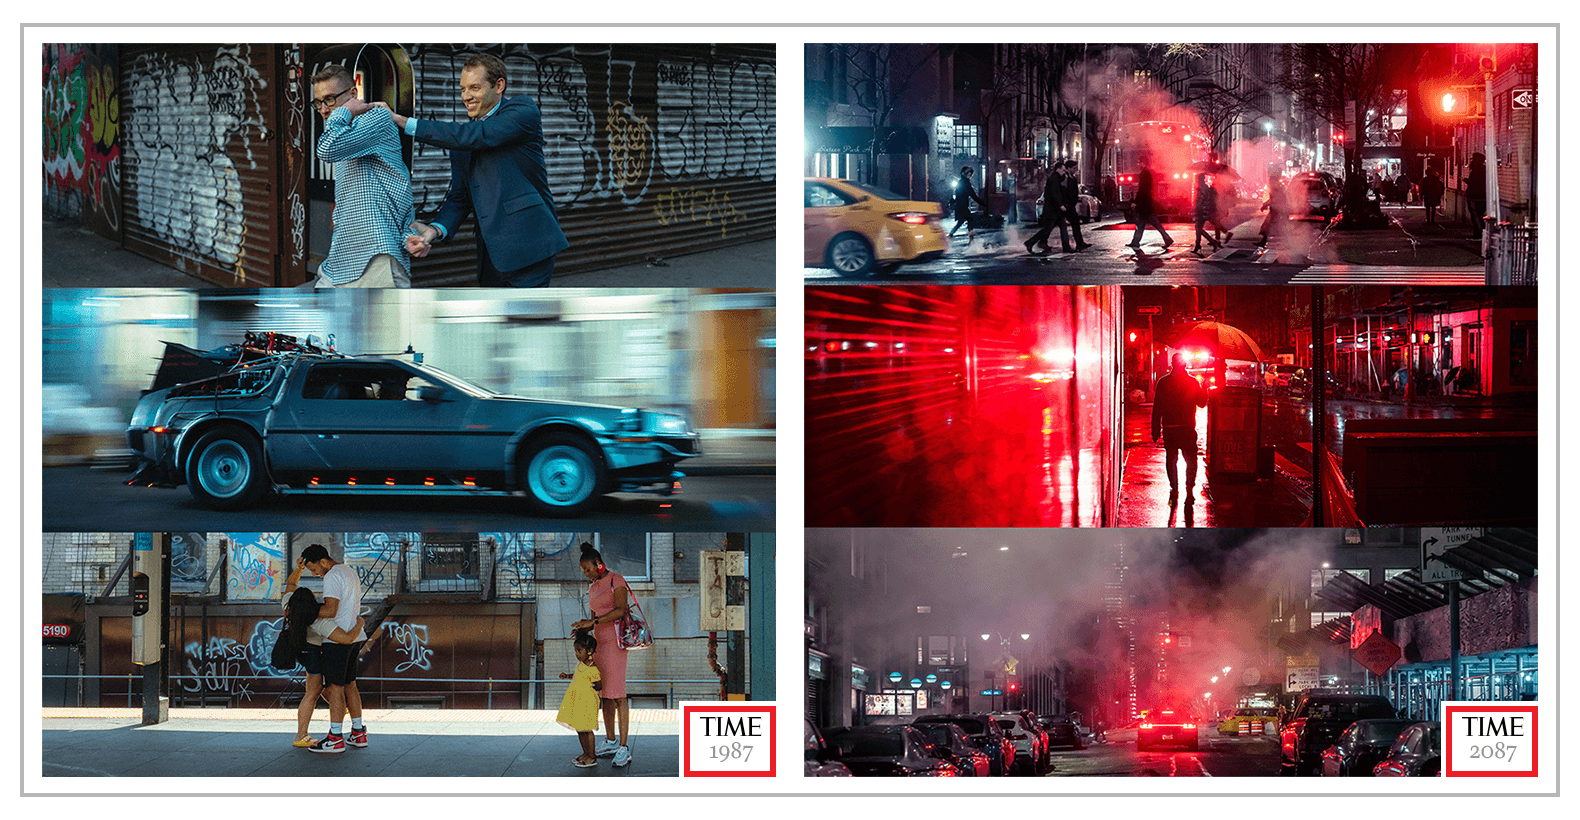 TIME TRAVEL, 1987 by Mike Szpot & The fog of time, 2087 by Dave Krugman